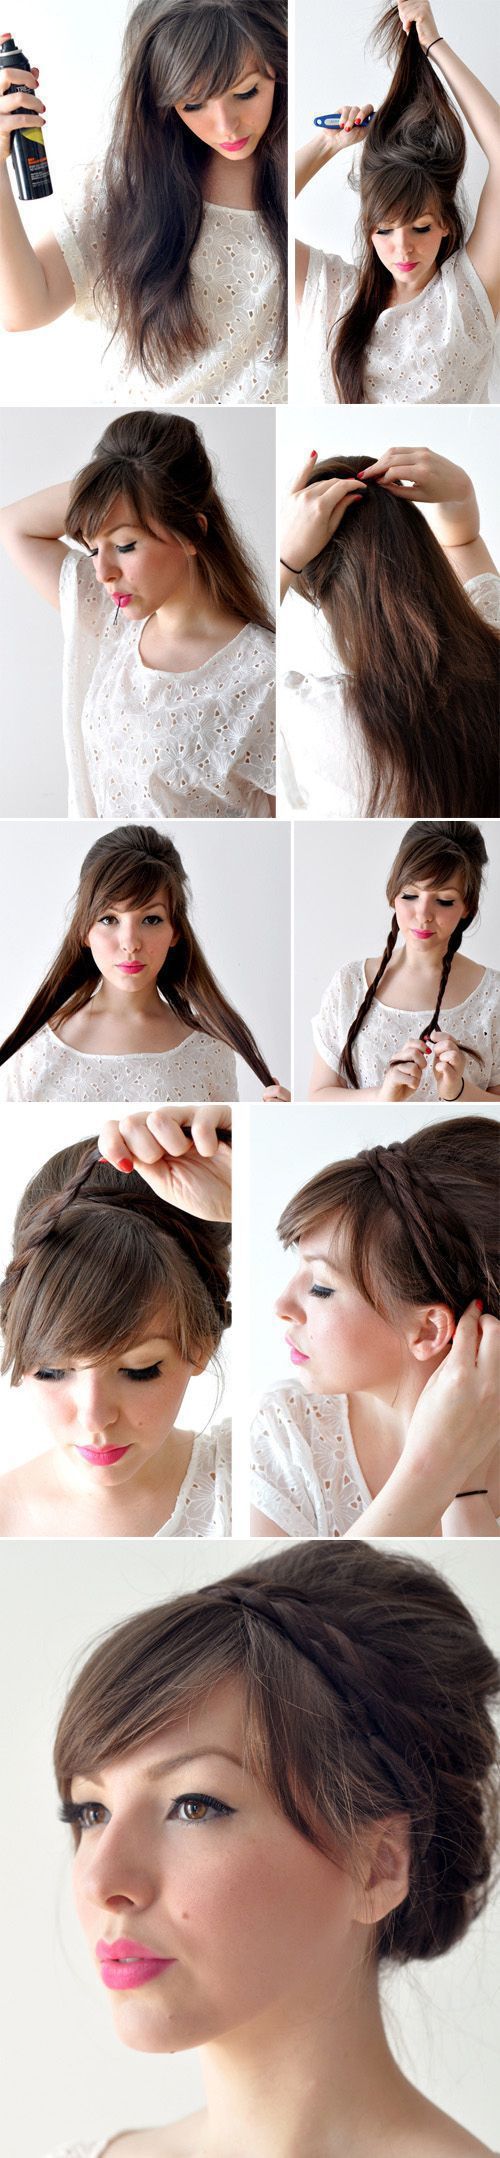 Easy Hairstyles For Short Hair To Do At Home Haircuts